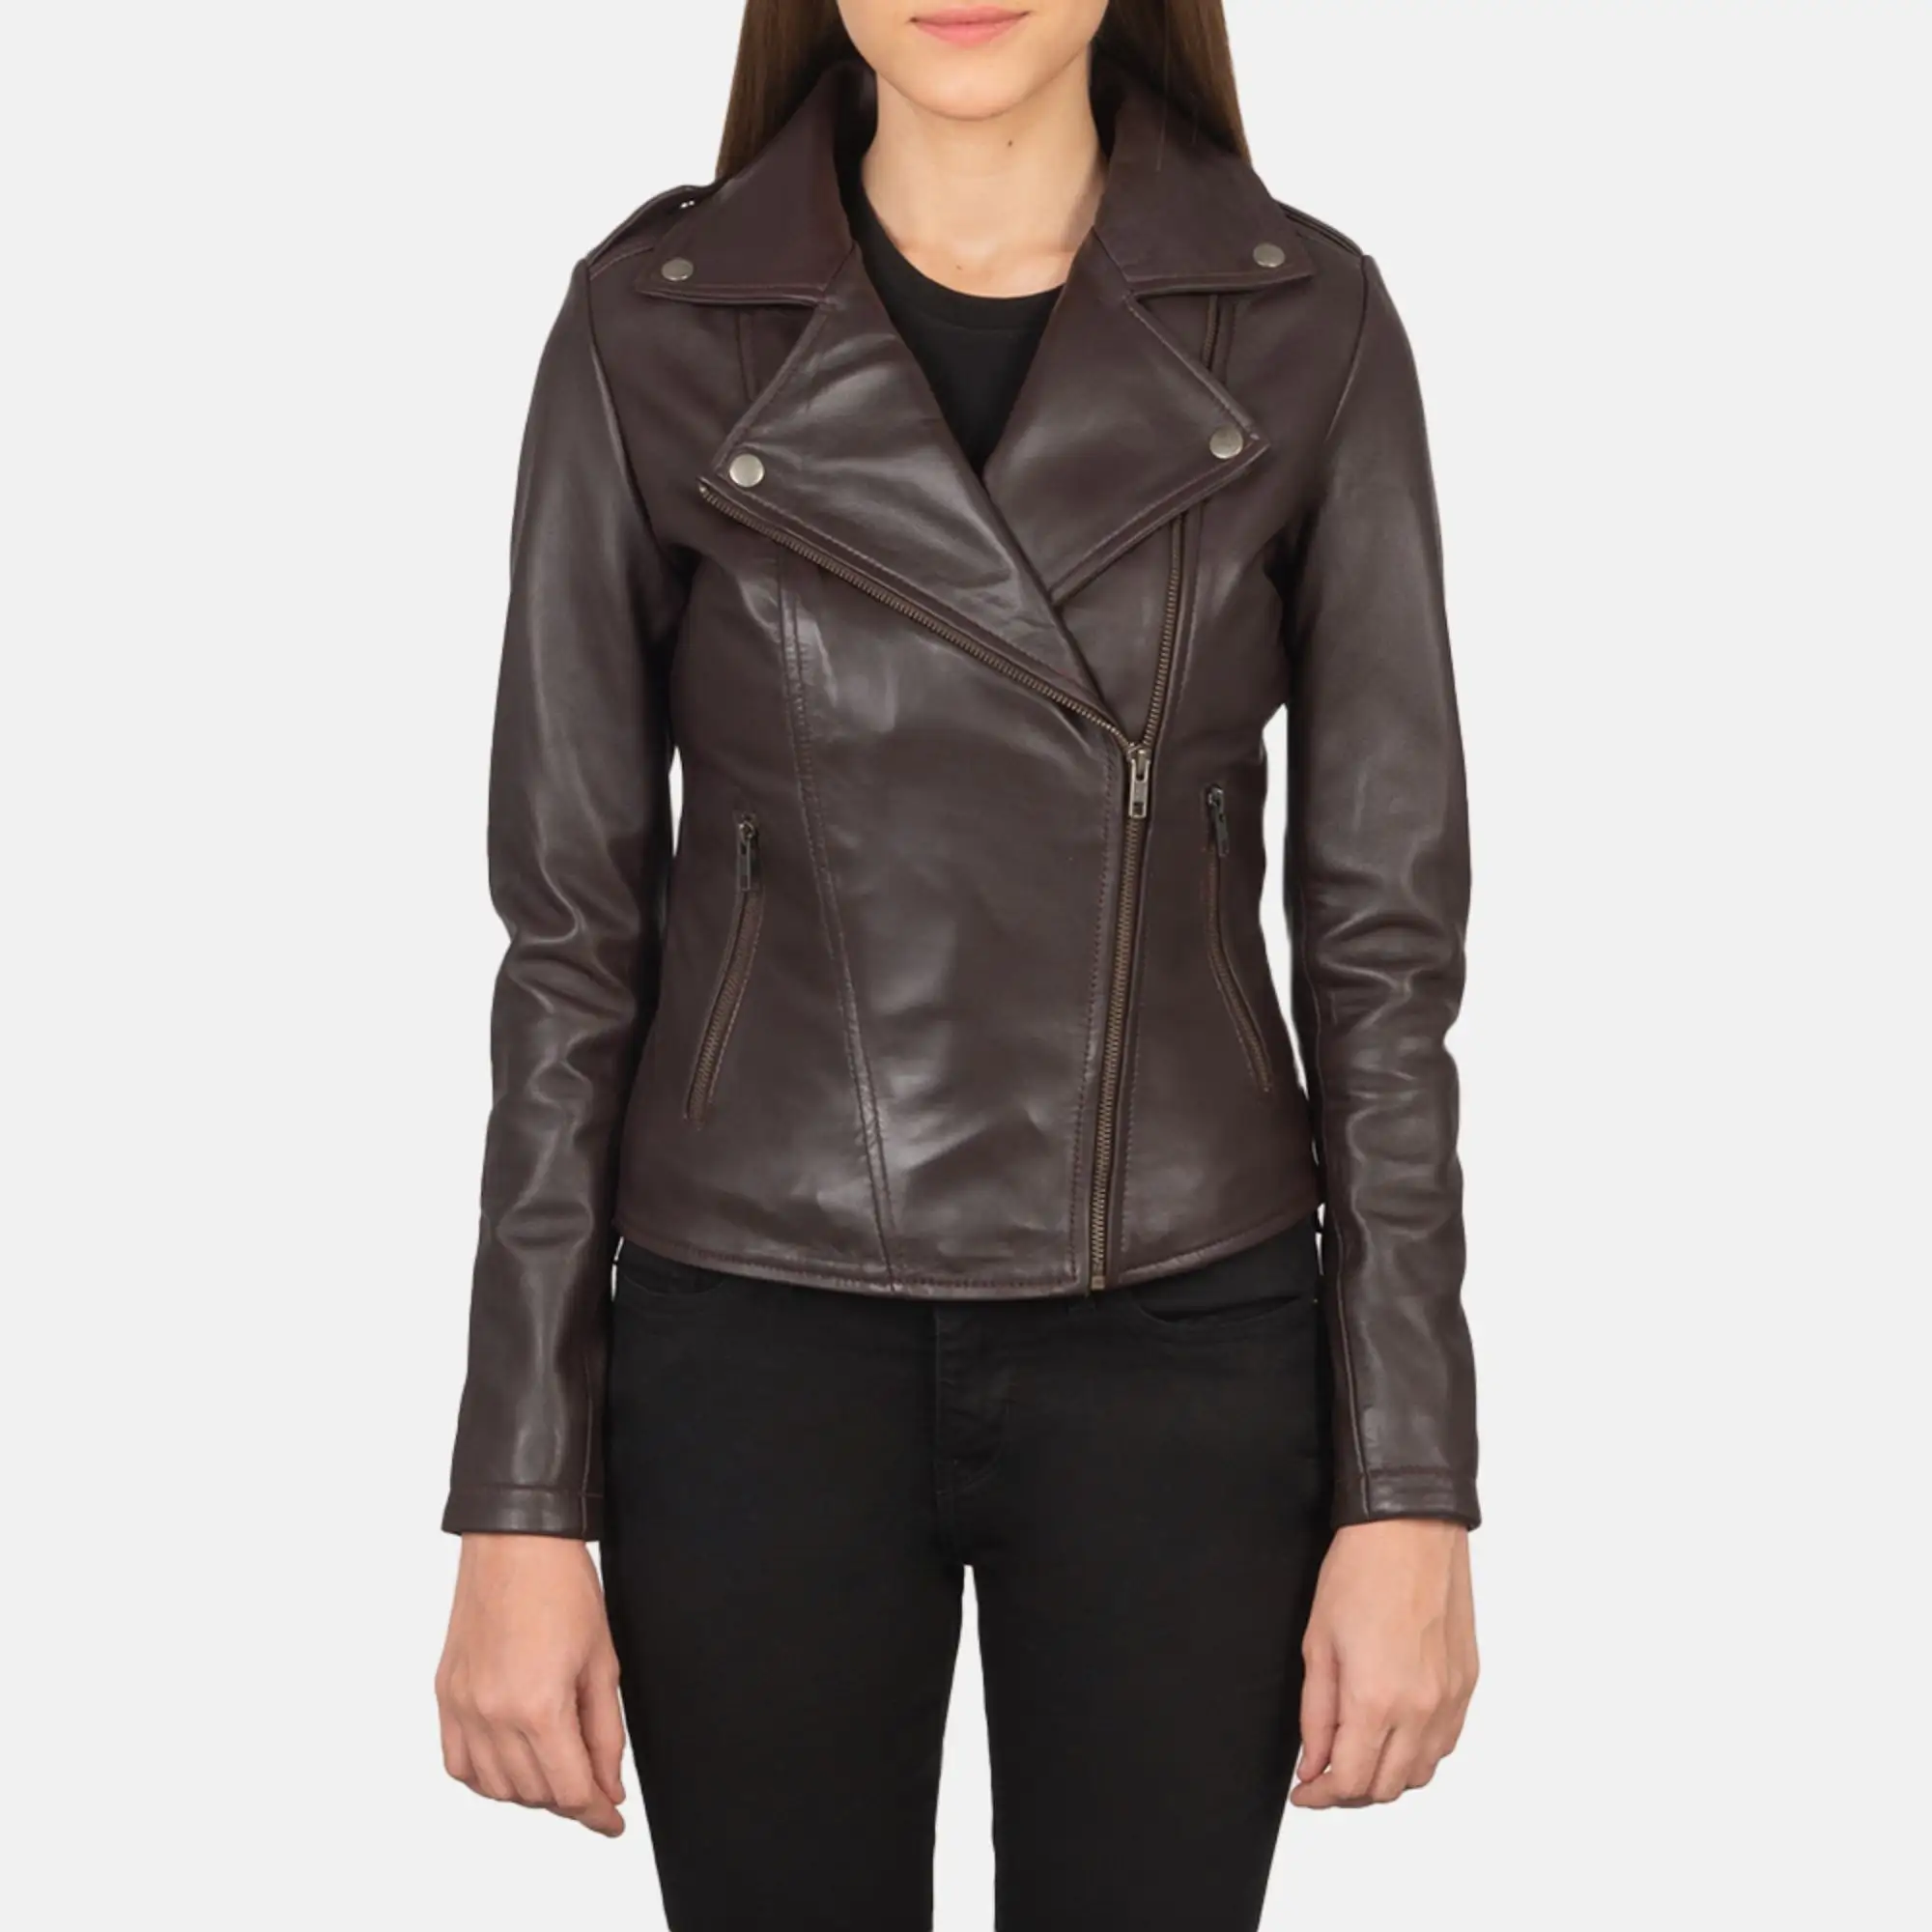 Real Leather Sheepskin Women's Biker Jacket Aniline Zipper Flashback Maroon Quilted Viscose Lining with inside outside Pockets